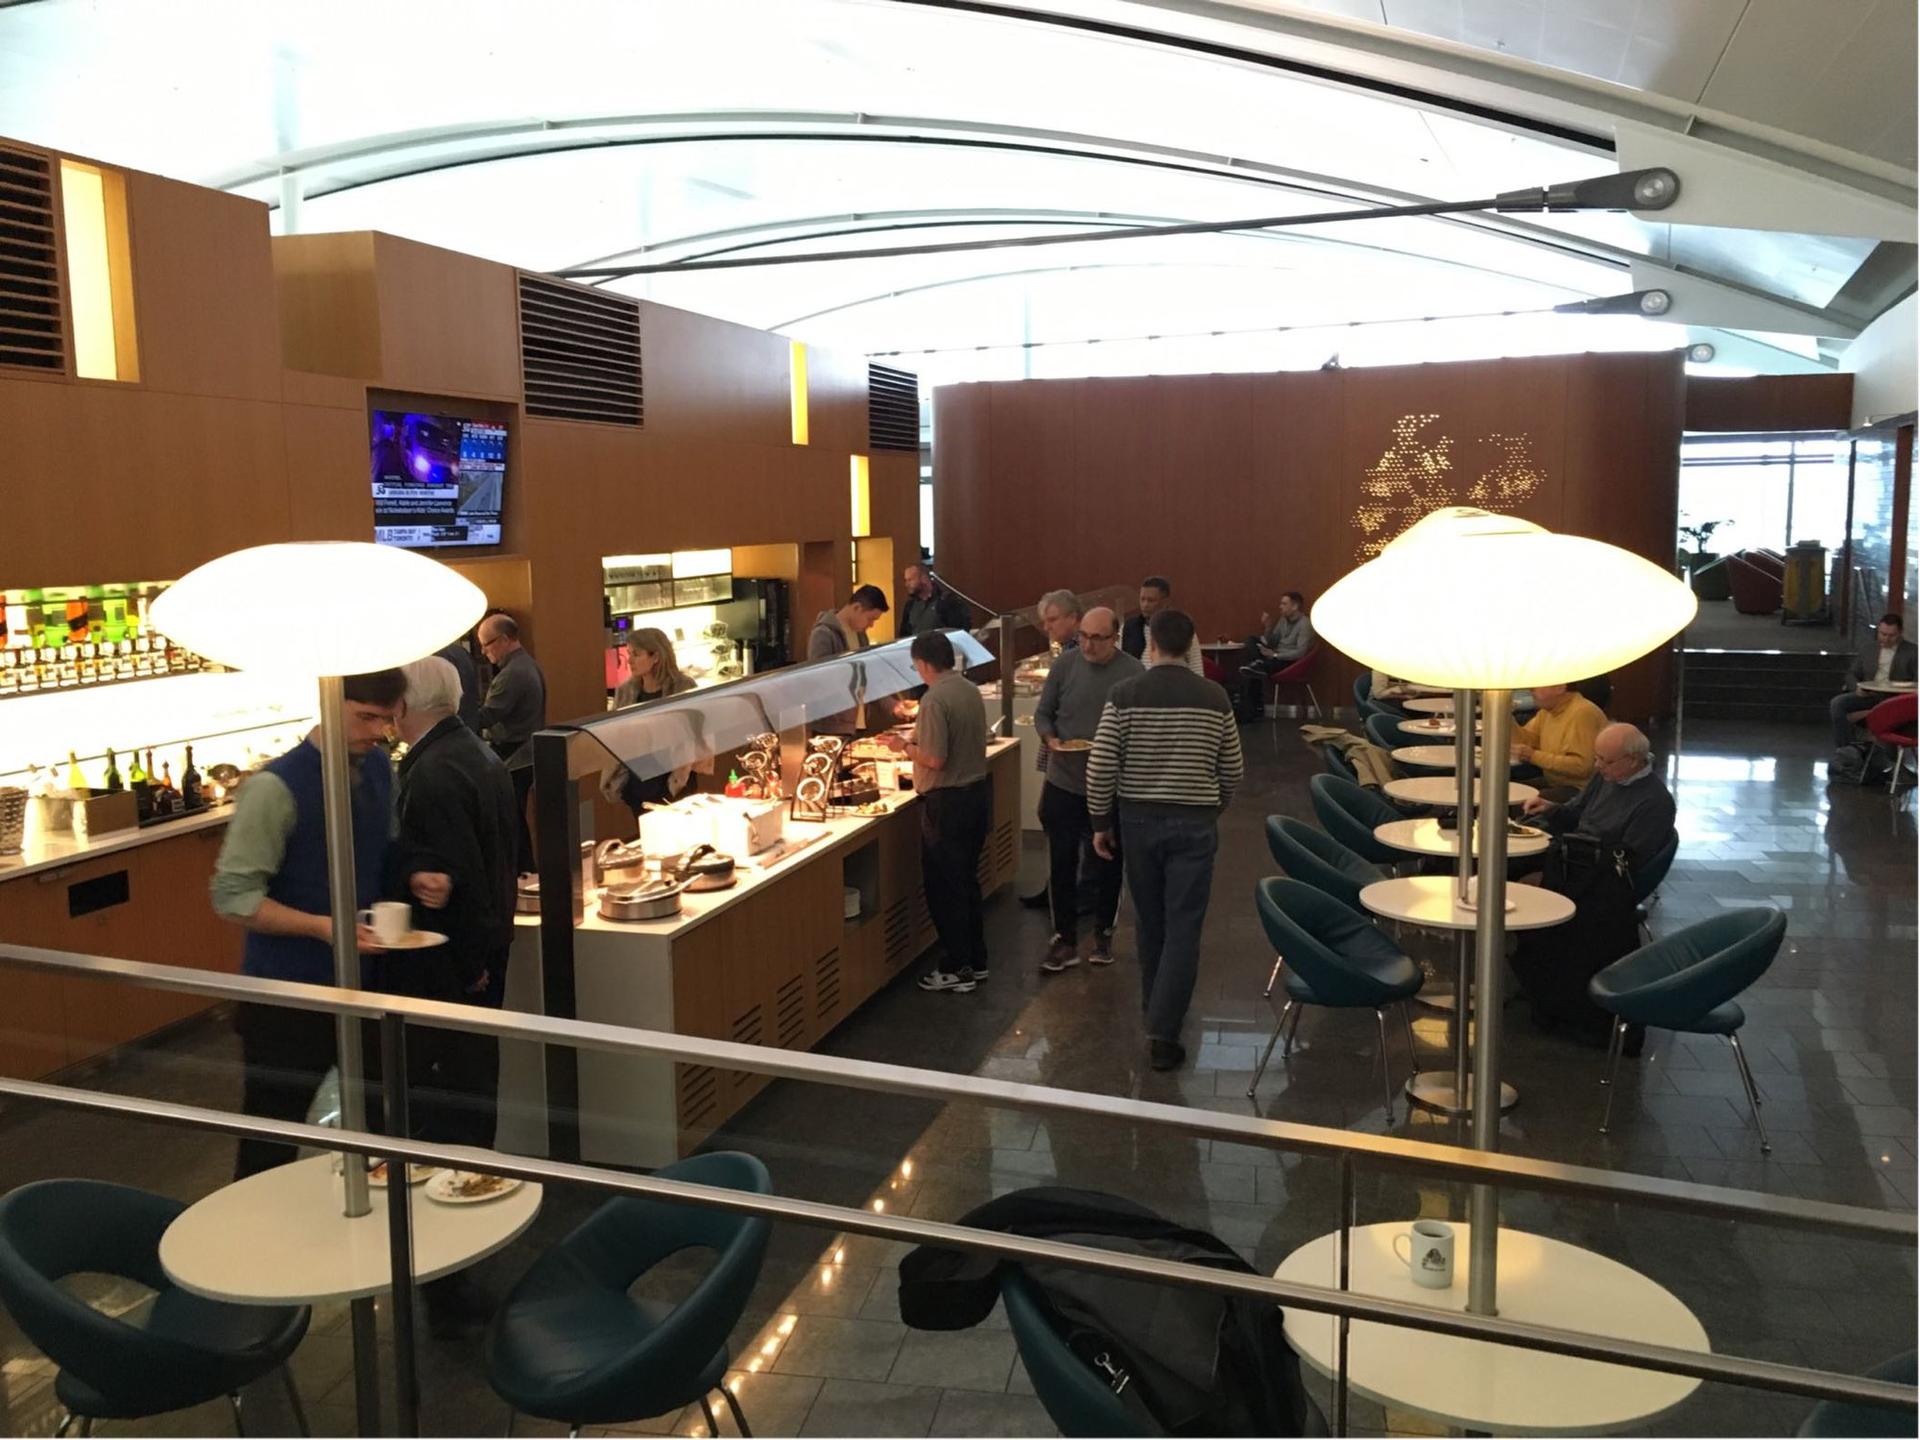 Air Canada Maple Leaf Lounge image 5 of 27